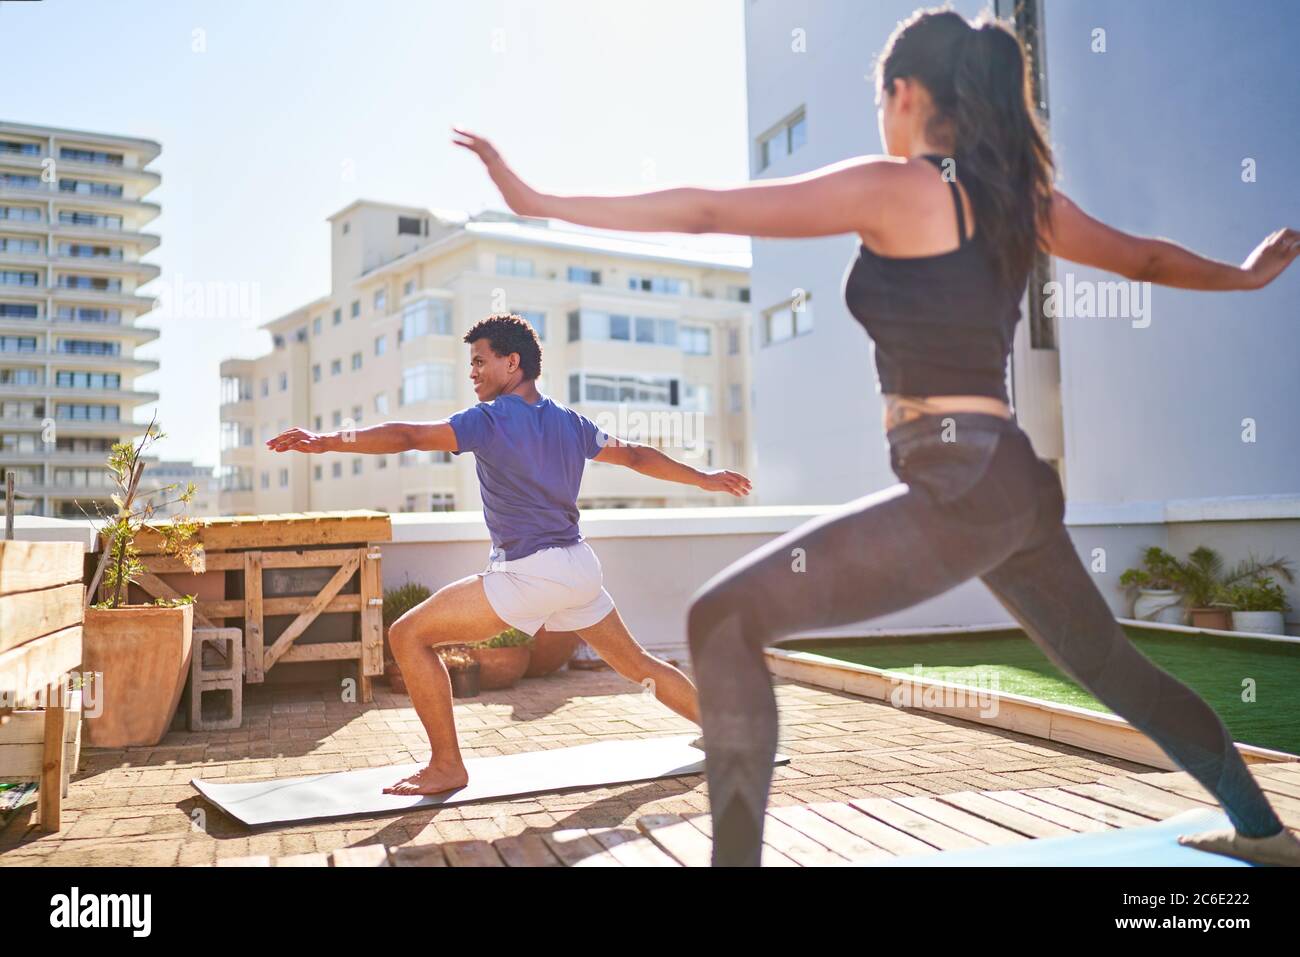 Young couple practicing yoga on sunny urban balcony rooftop Stock Photo